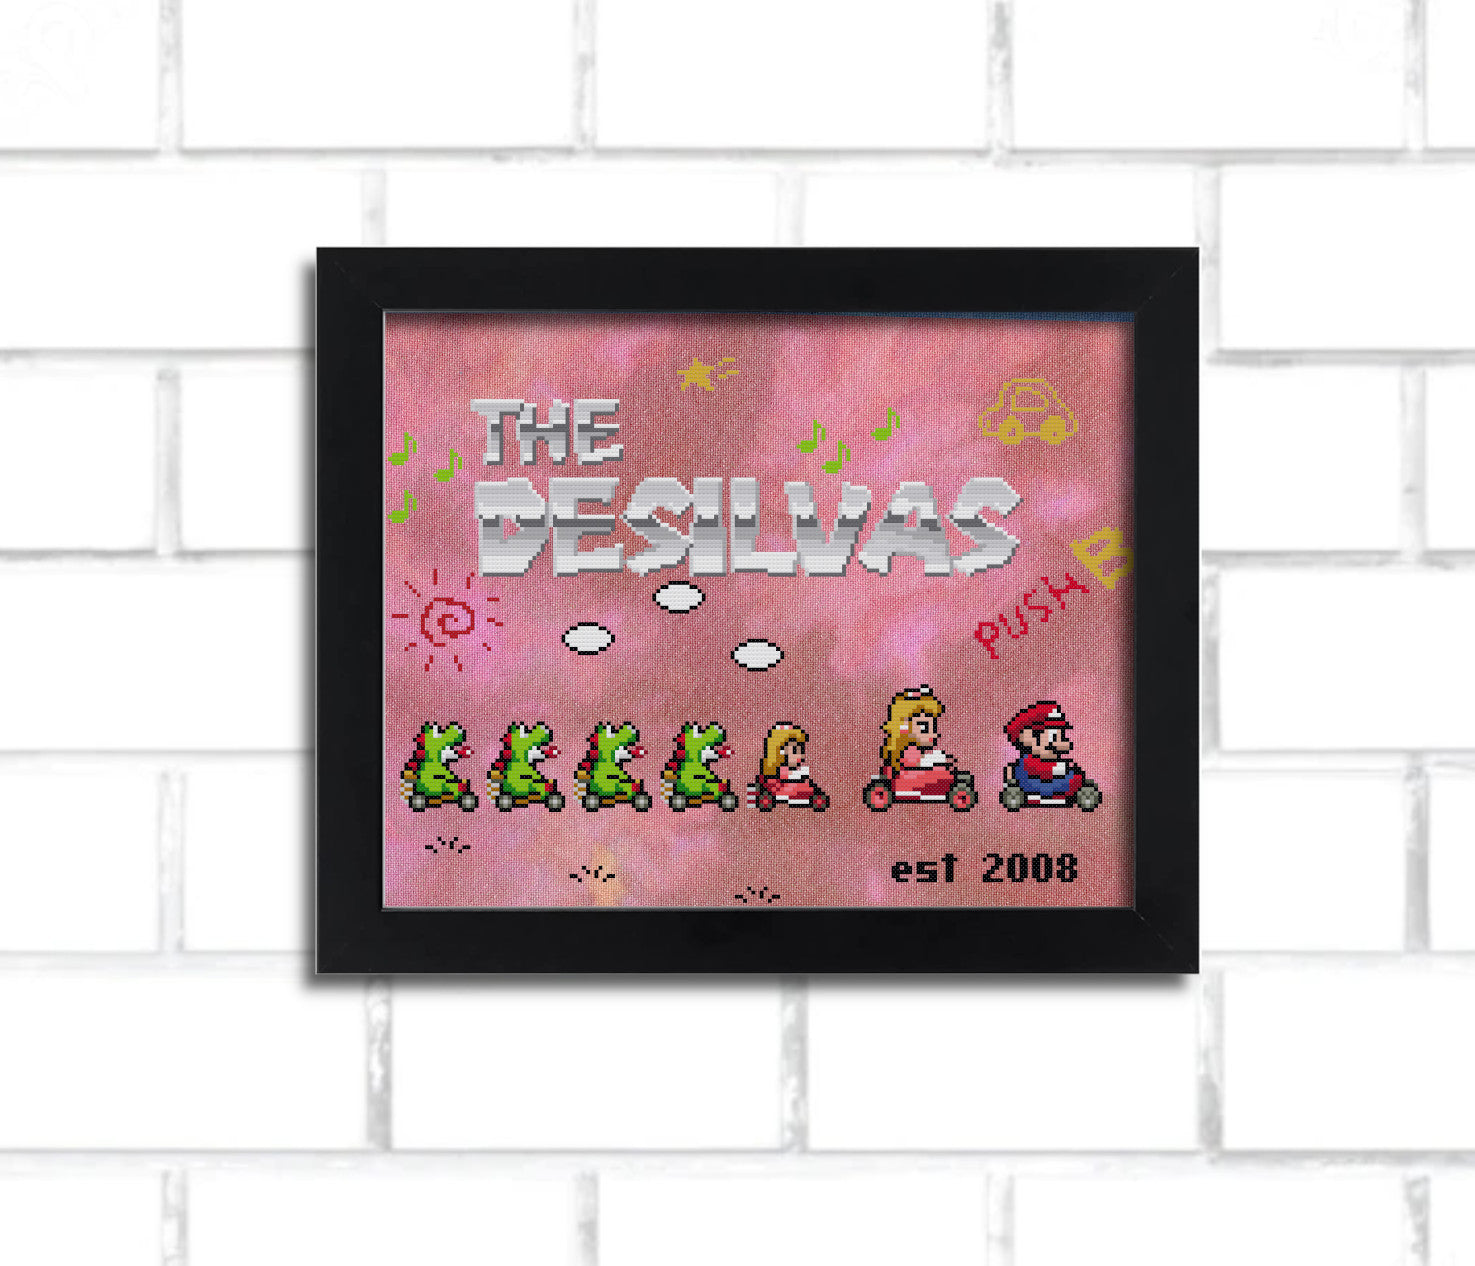 A digital render of a cross stitch, it says "the desilvas" in a metallic looking 8 bit mario-inspired font and features Super Mario Kart inspired sprites of Mario, peach, a small peach, and four small yoshis.. it's in a black frame hung on a white brick wall.